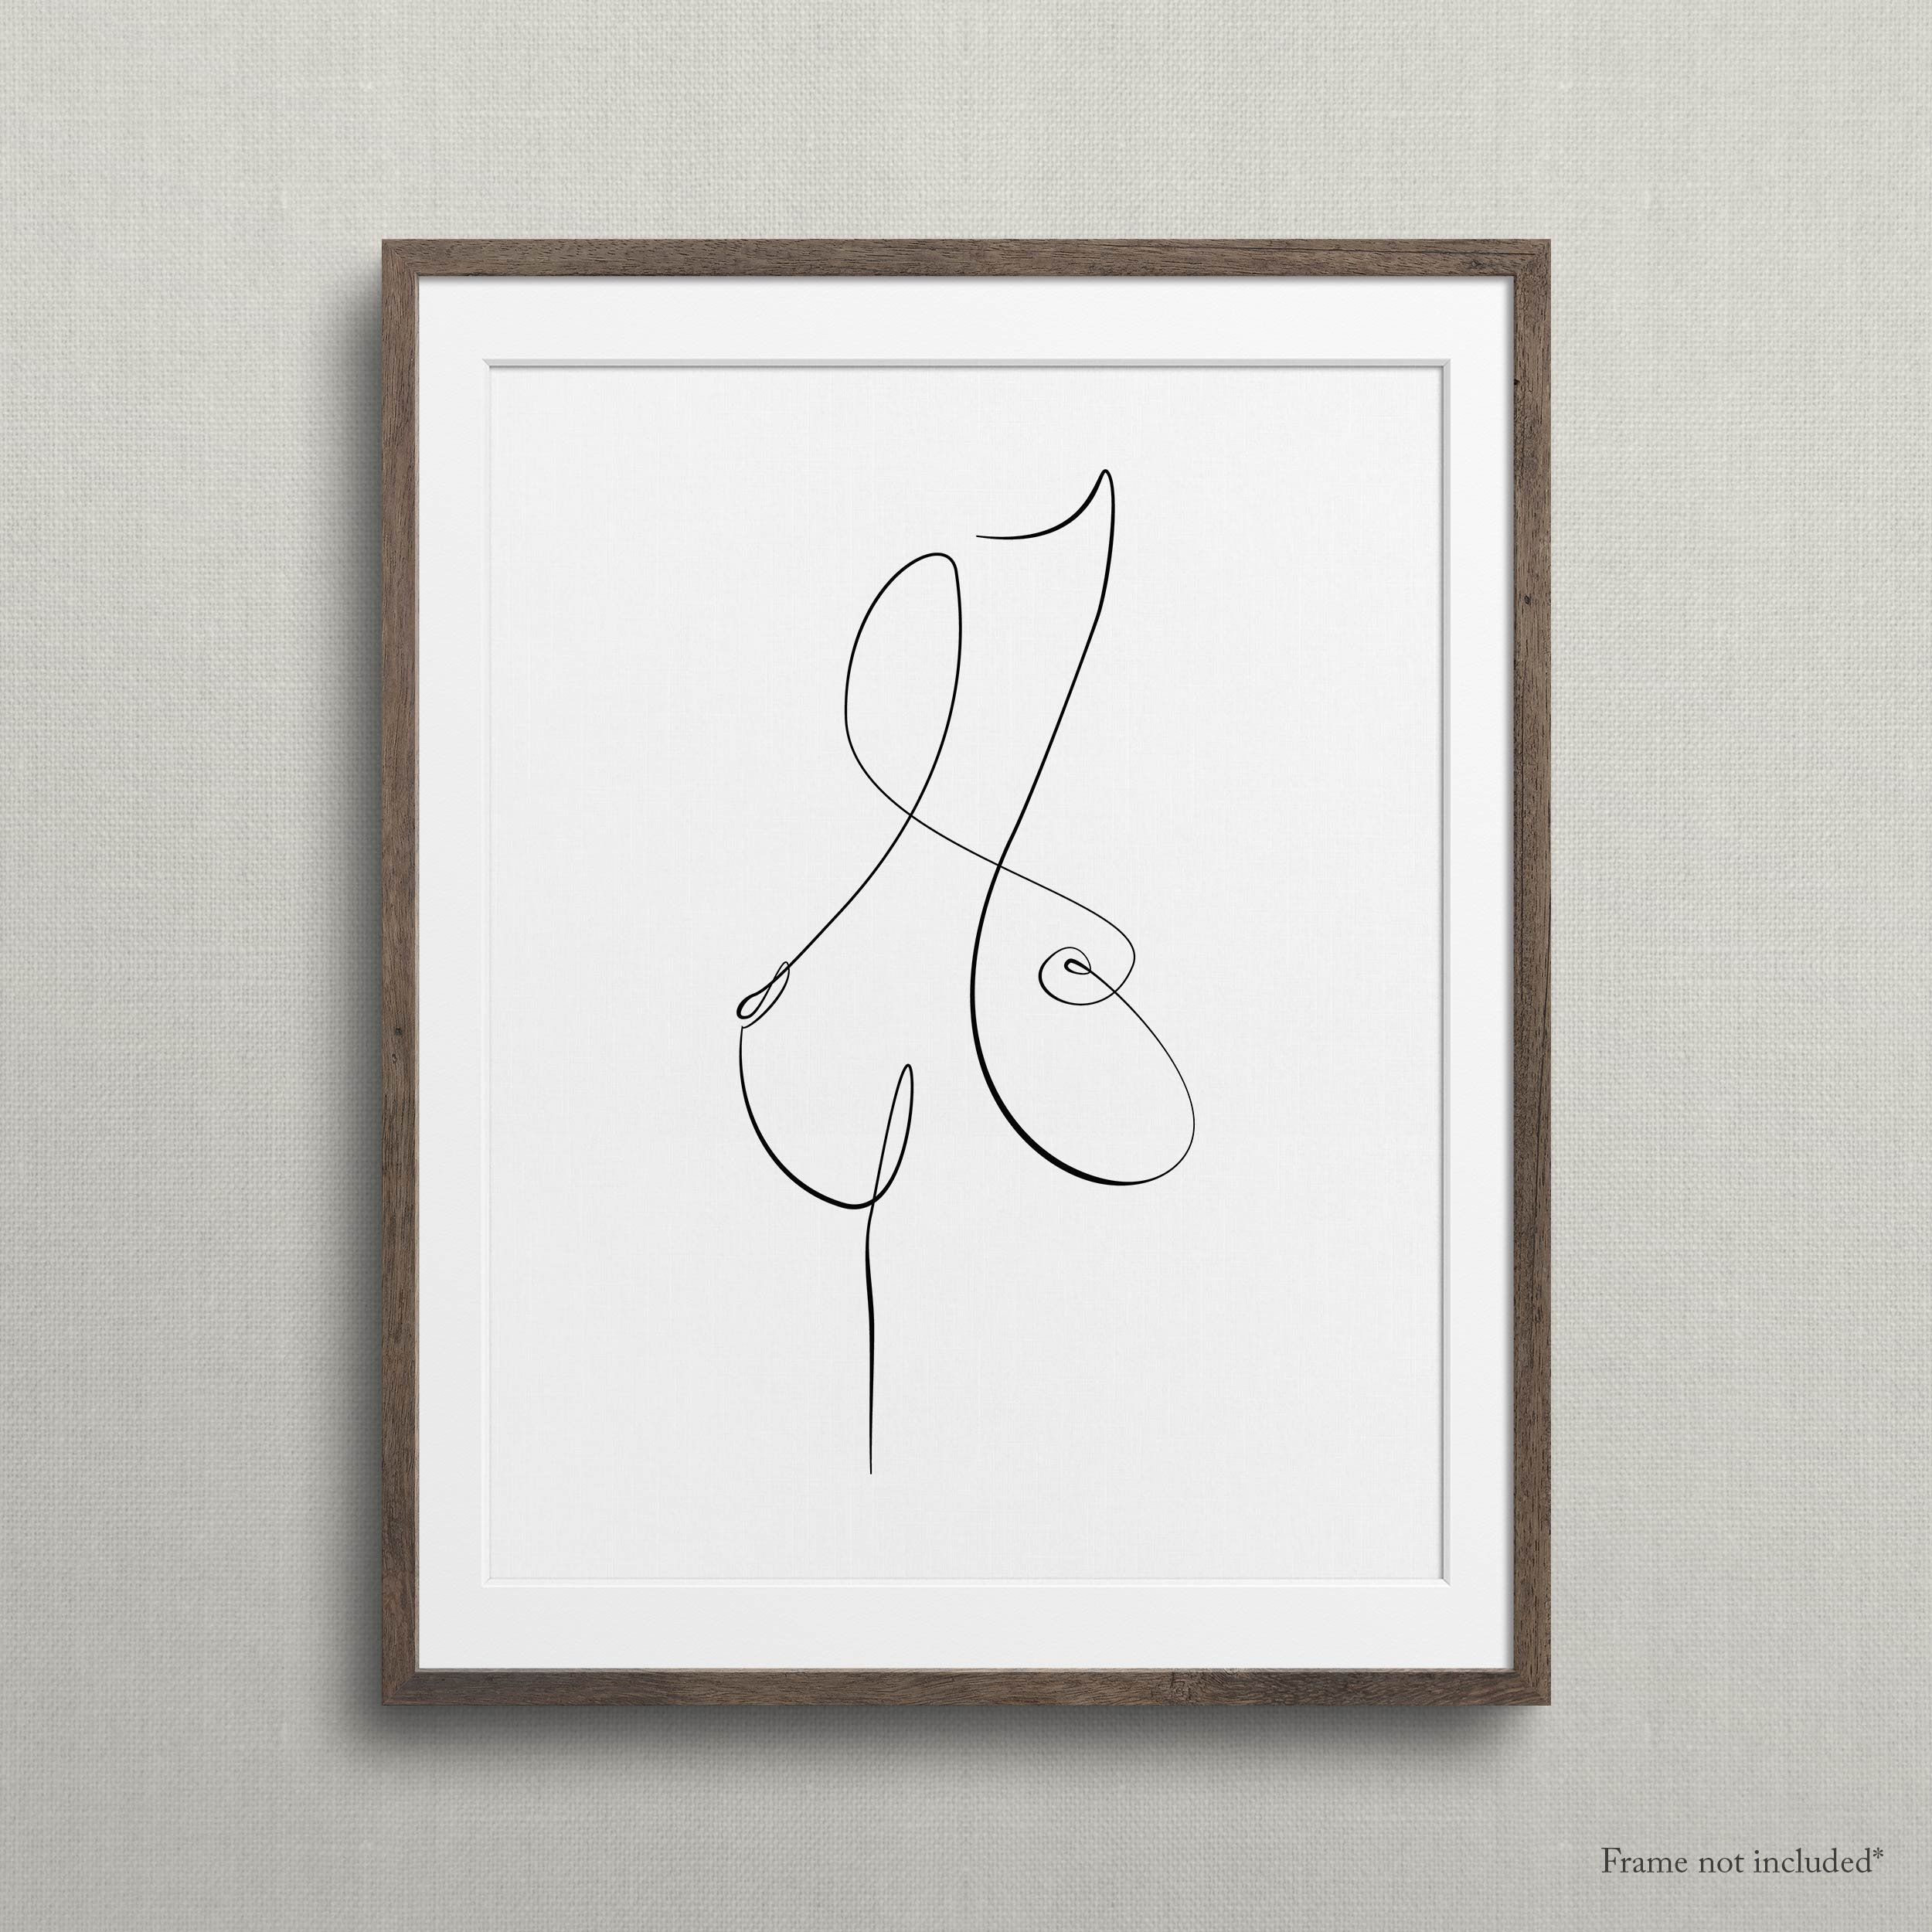 Cute Boobs - Quirky Art - Breasts - Funny Boobs - Shapes and Sizes